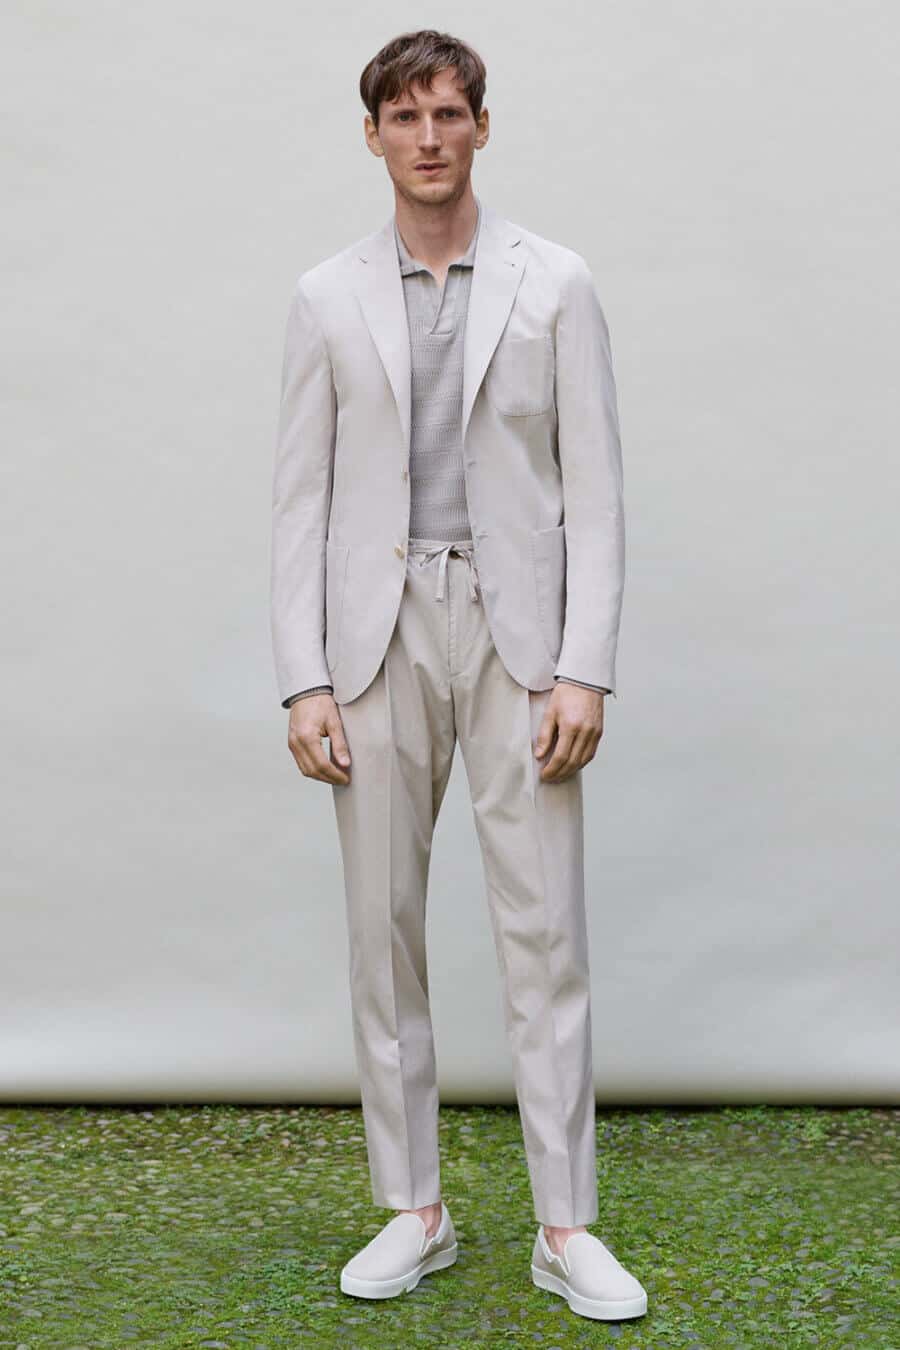 Men's light grey suit, polo shirt and sneakers outfit